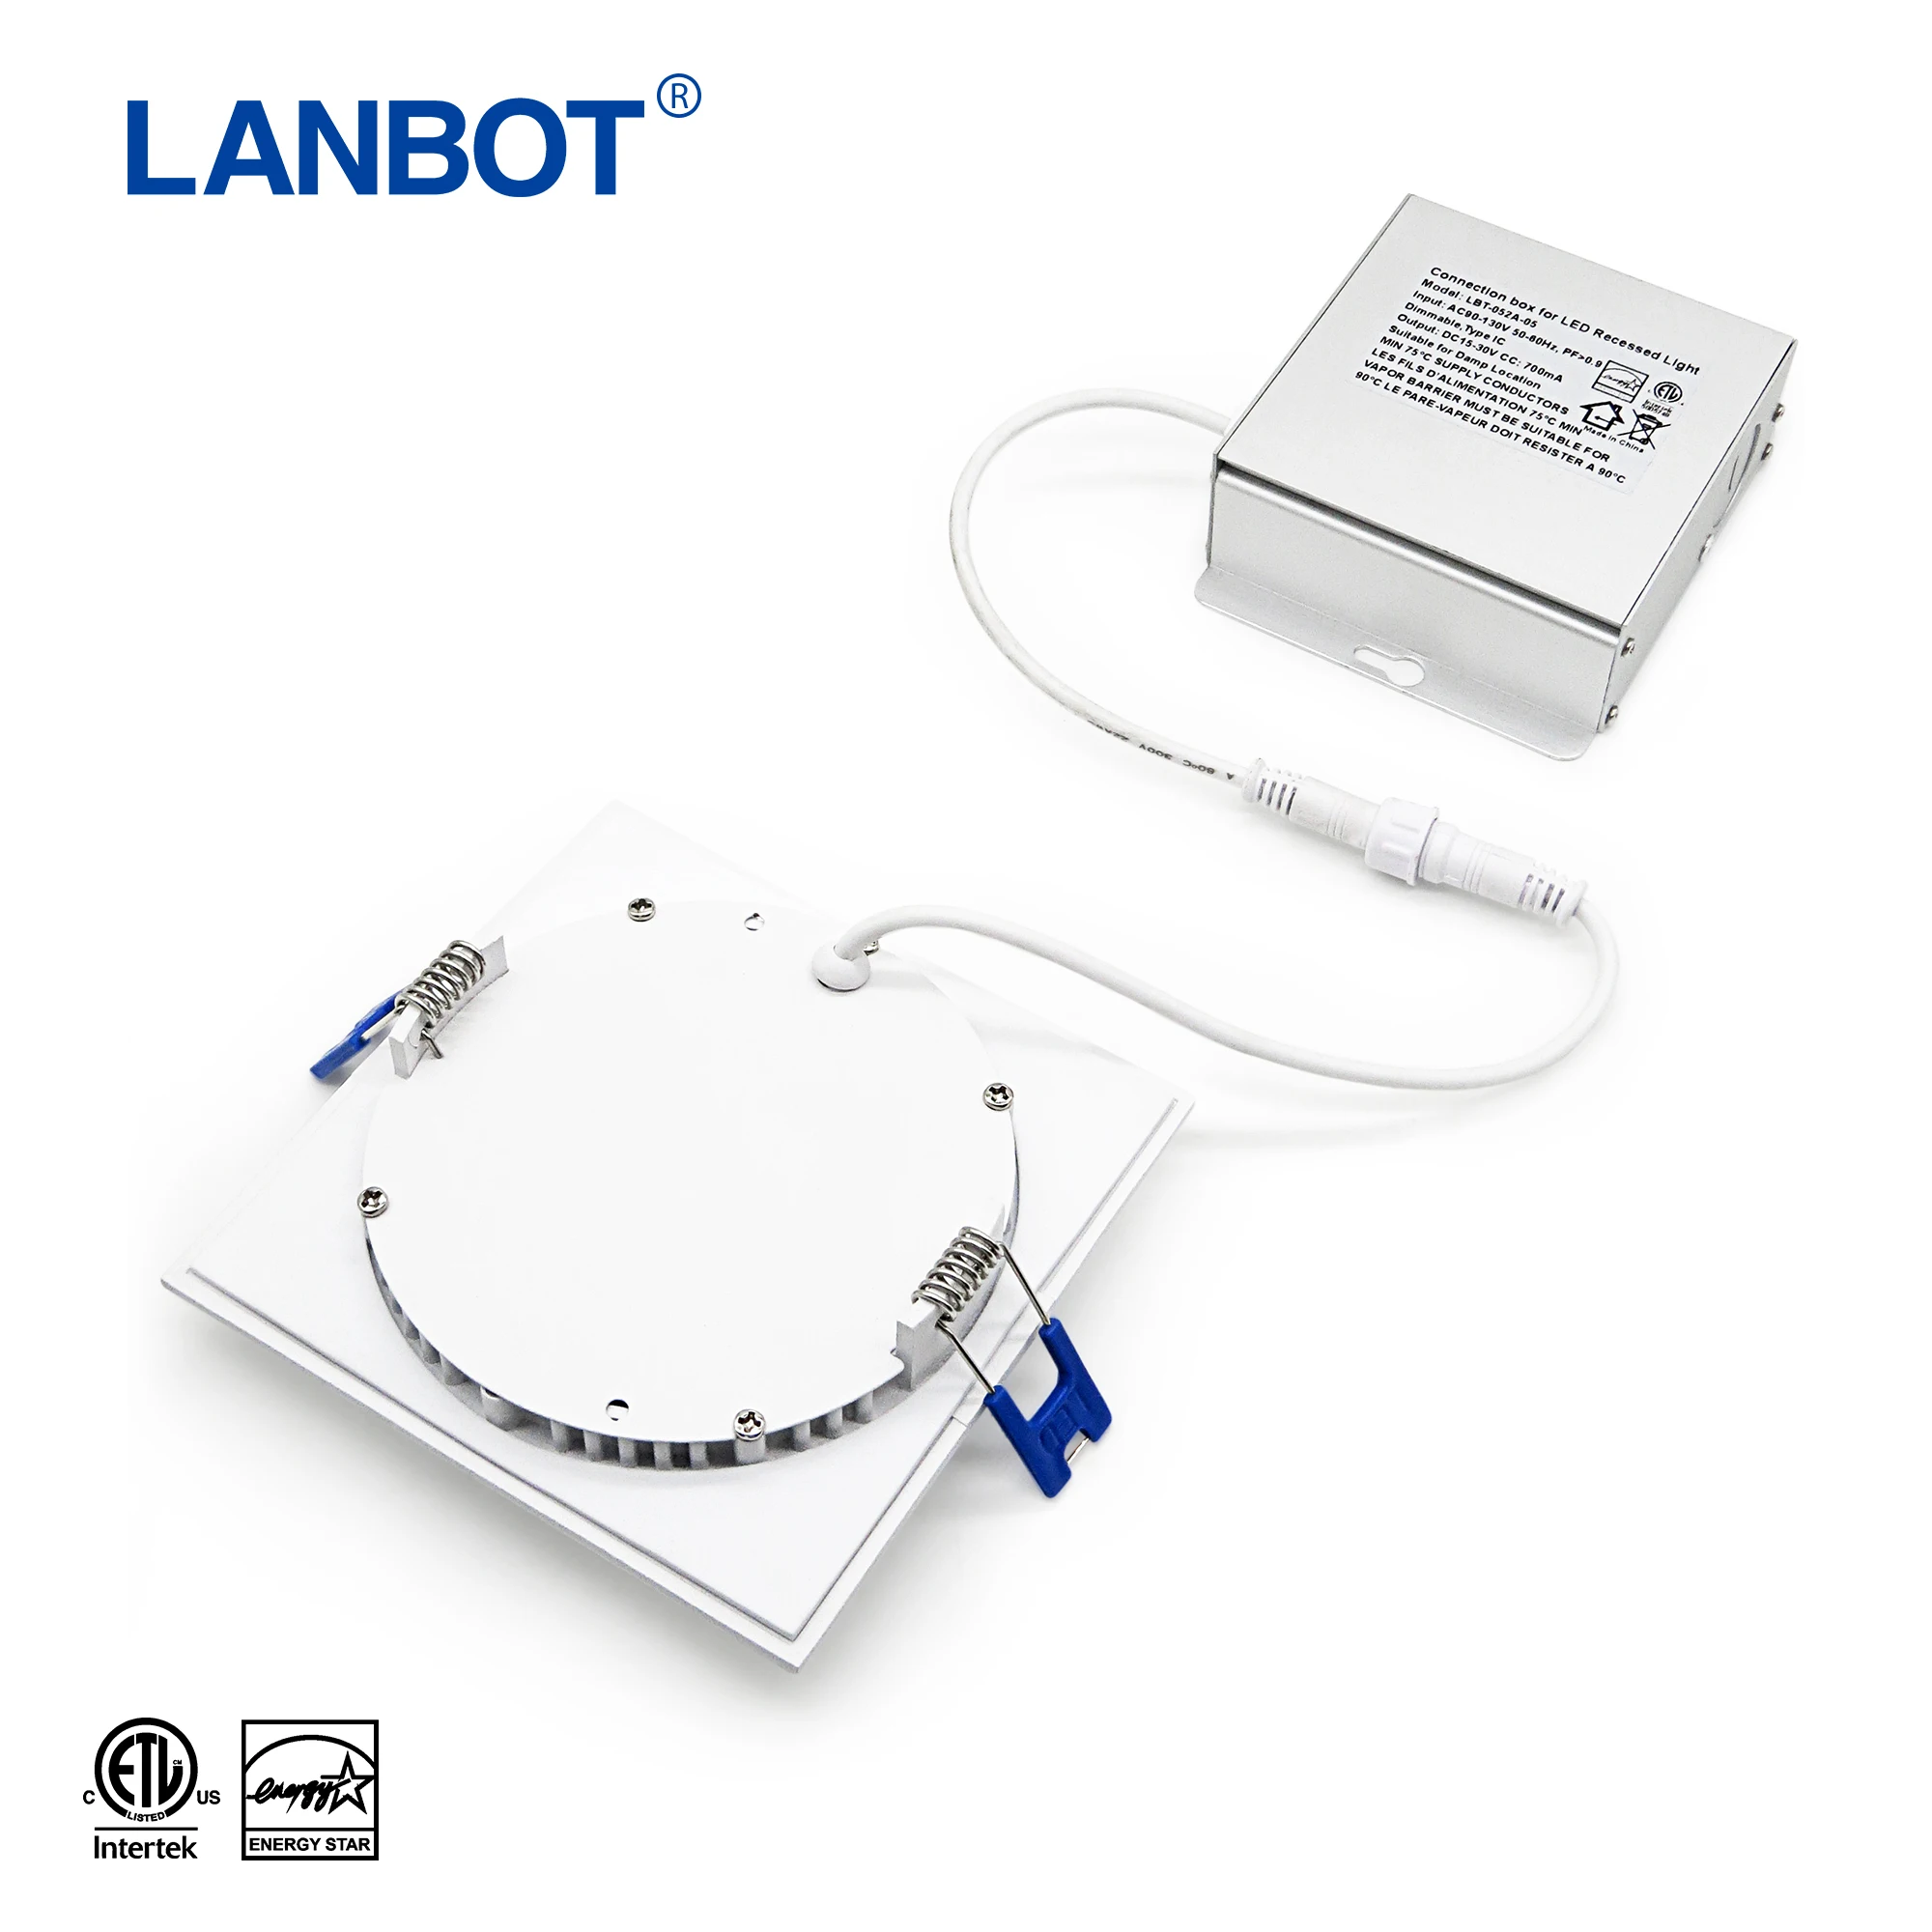 

Lanbot ETL 4 Inch 9W 12W LED Recessed Slim Panel Light Downlight With Junction Box